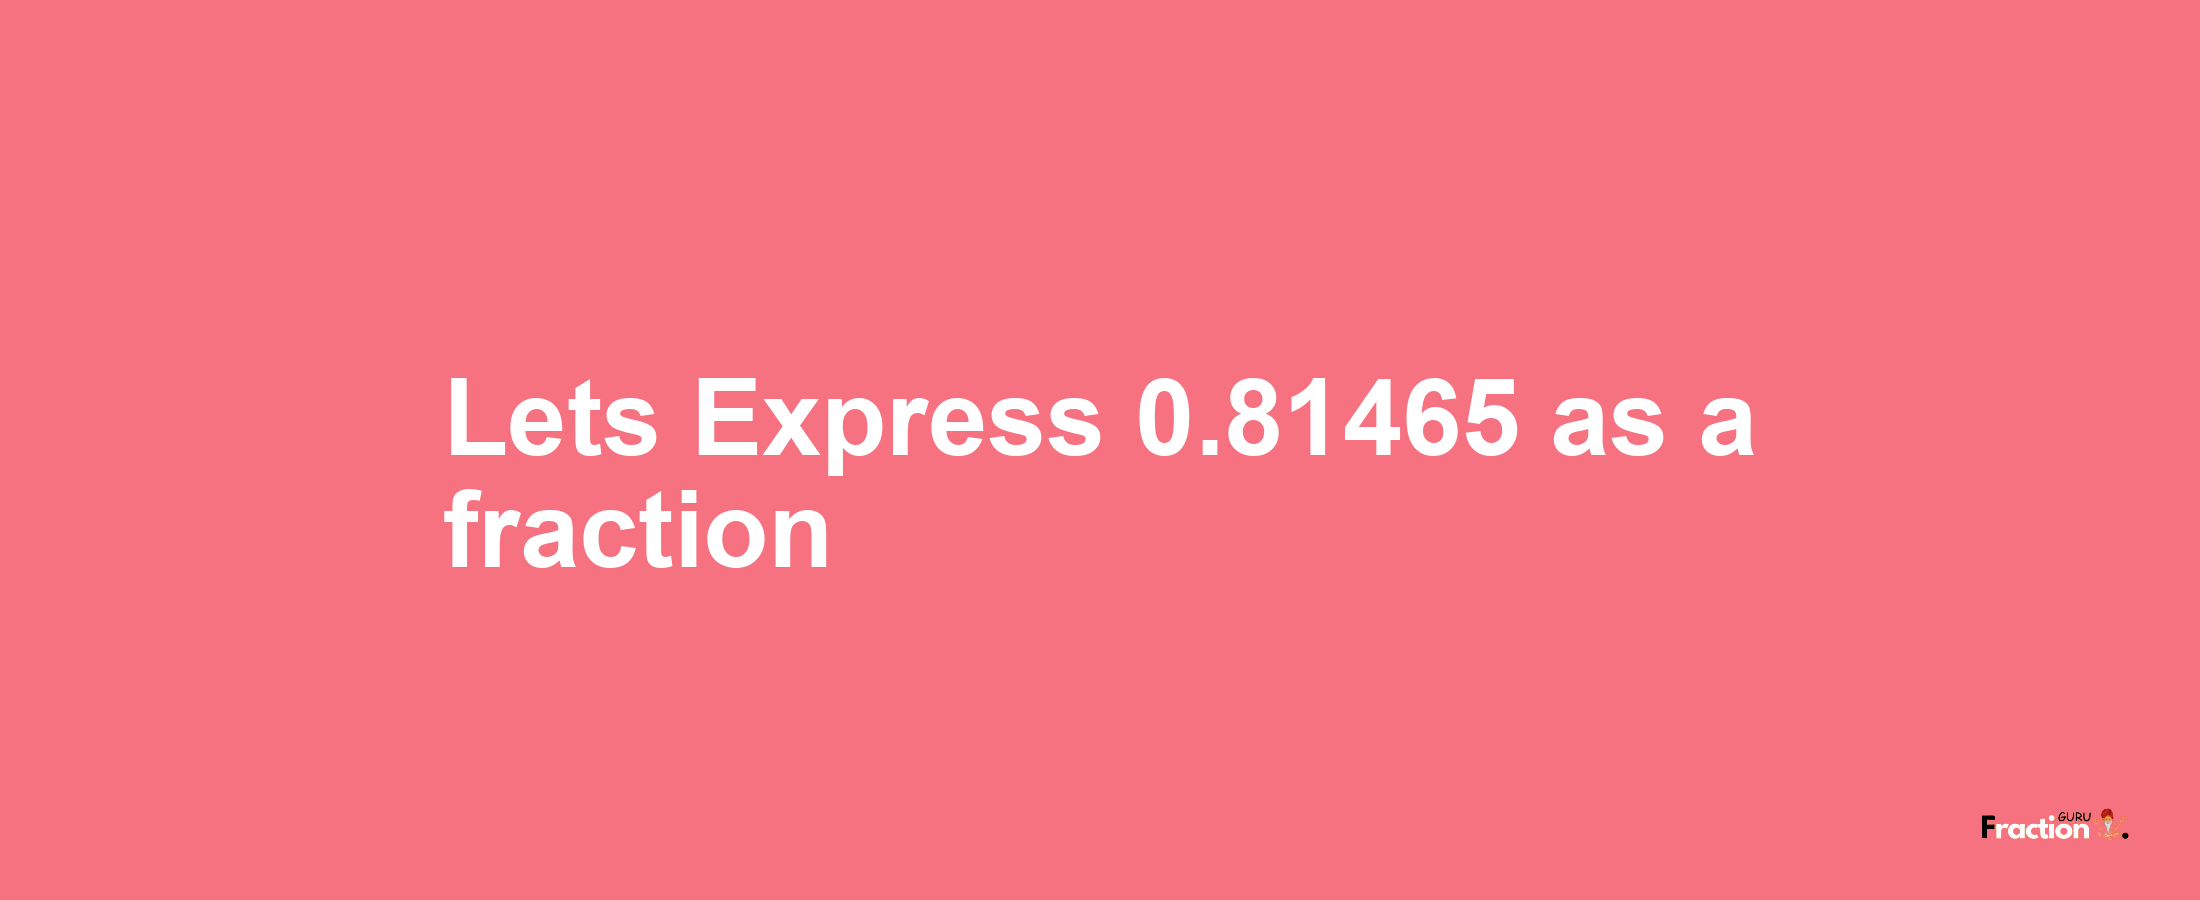 Lets Express 0.81465 as afraction